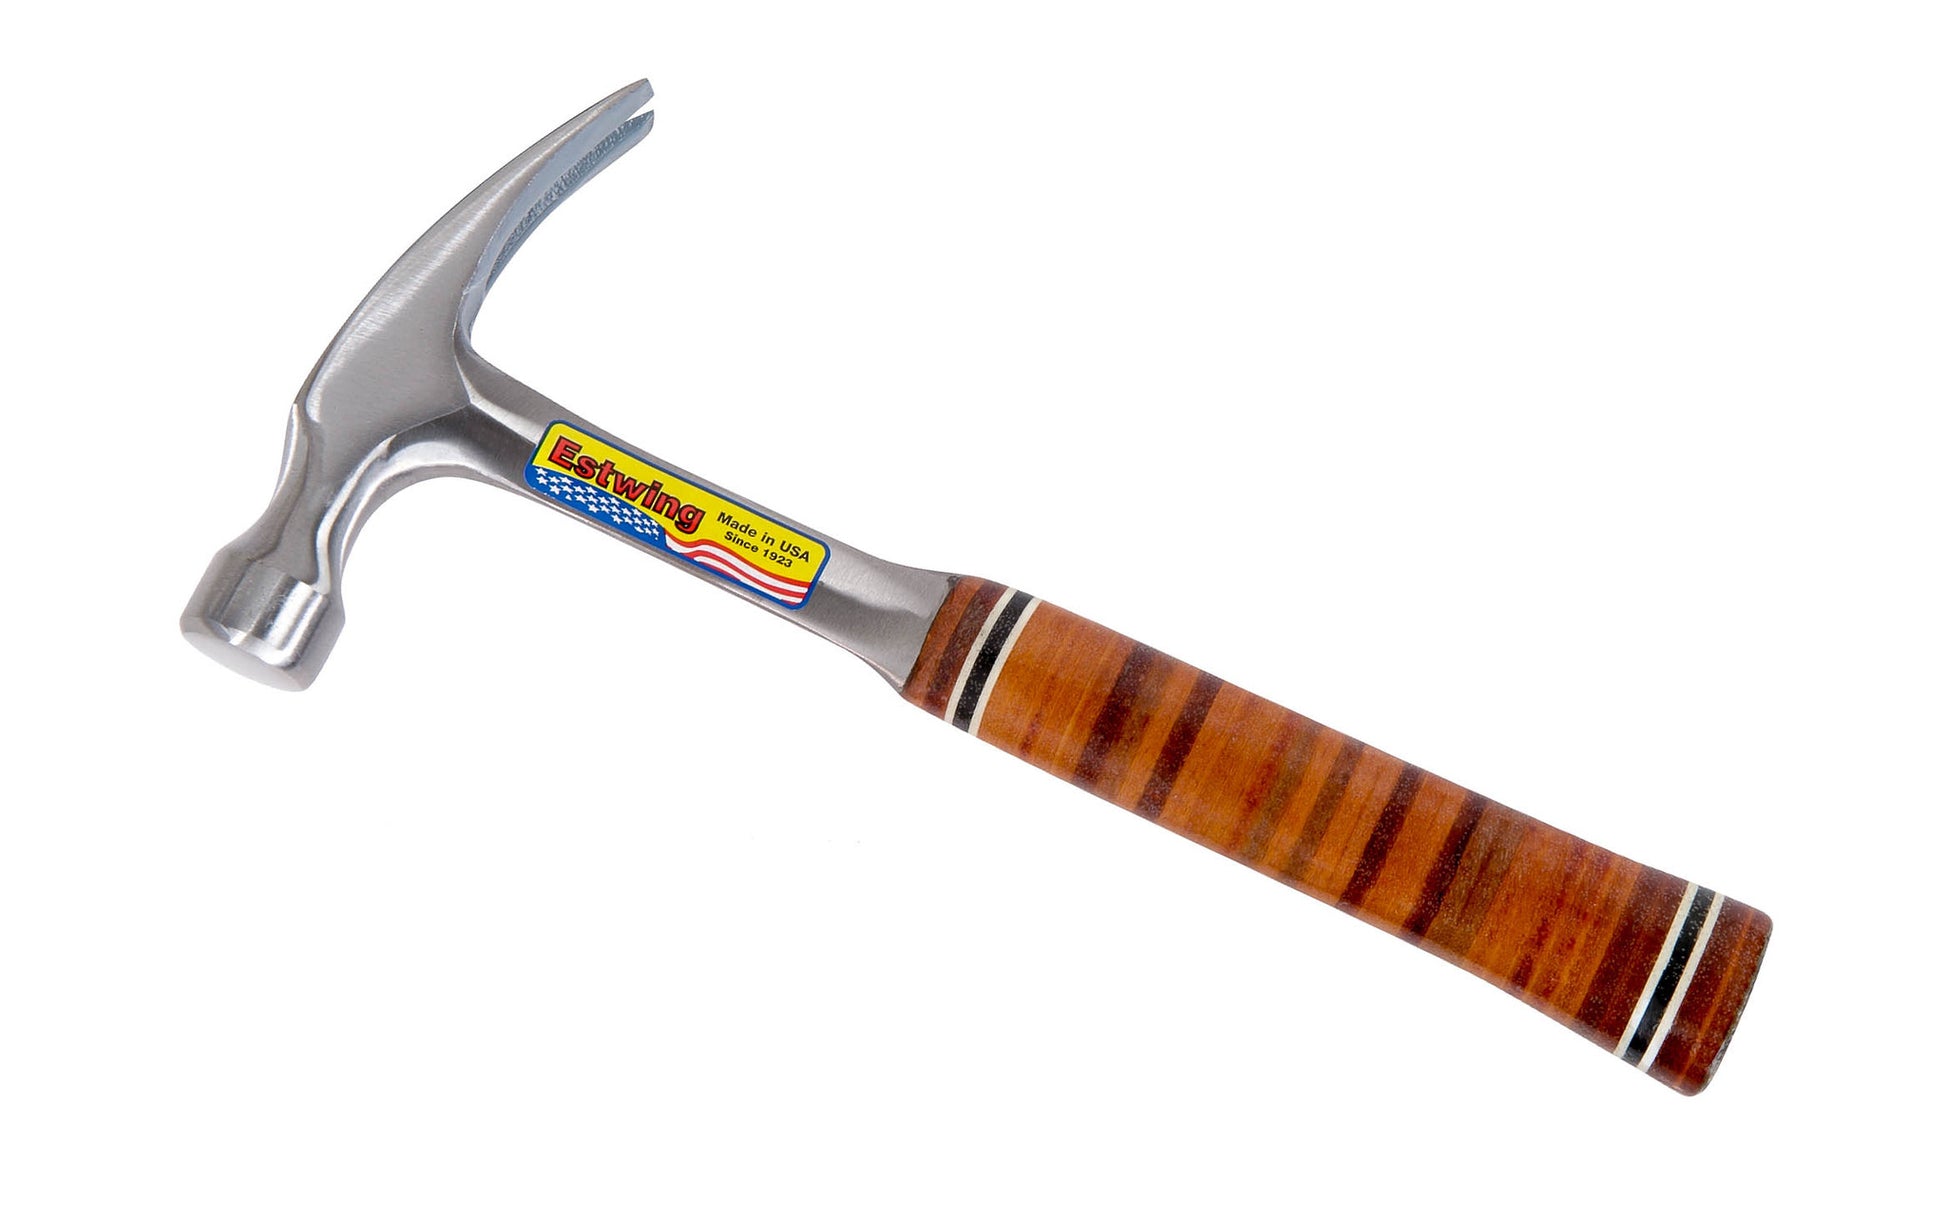 Veritas Wile Plane Hammer - Classic Hand Tools Limited